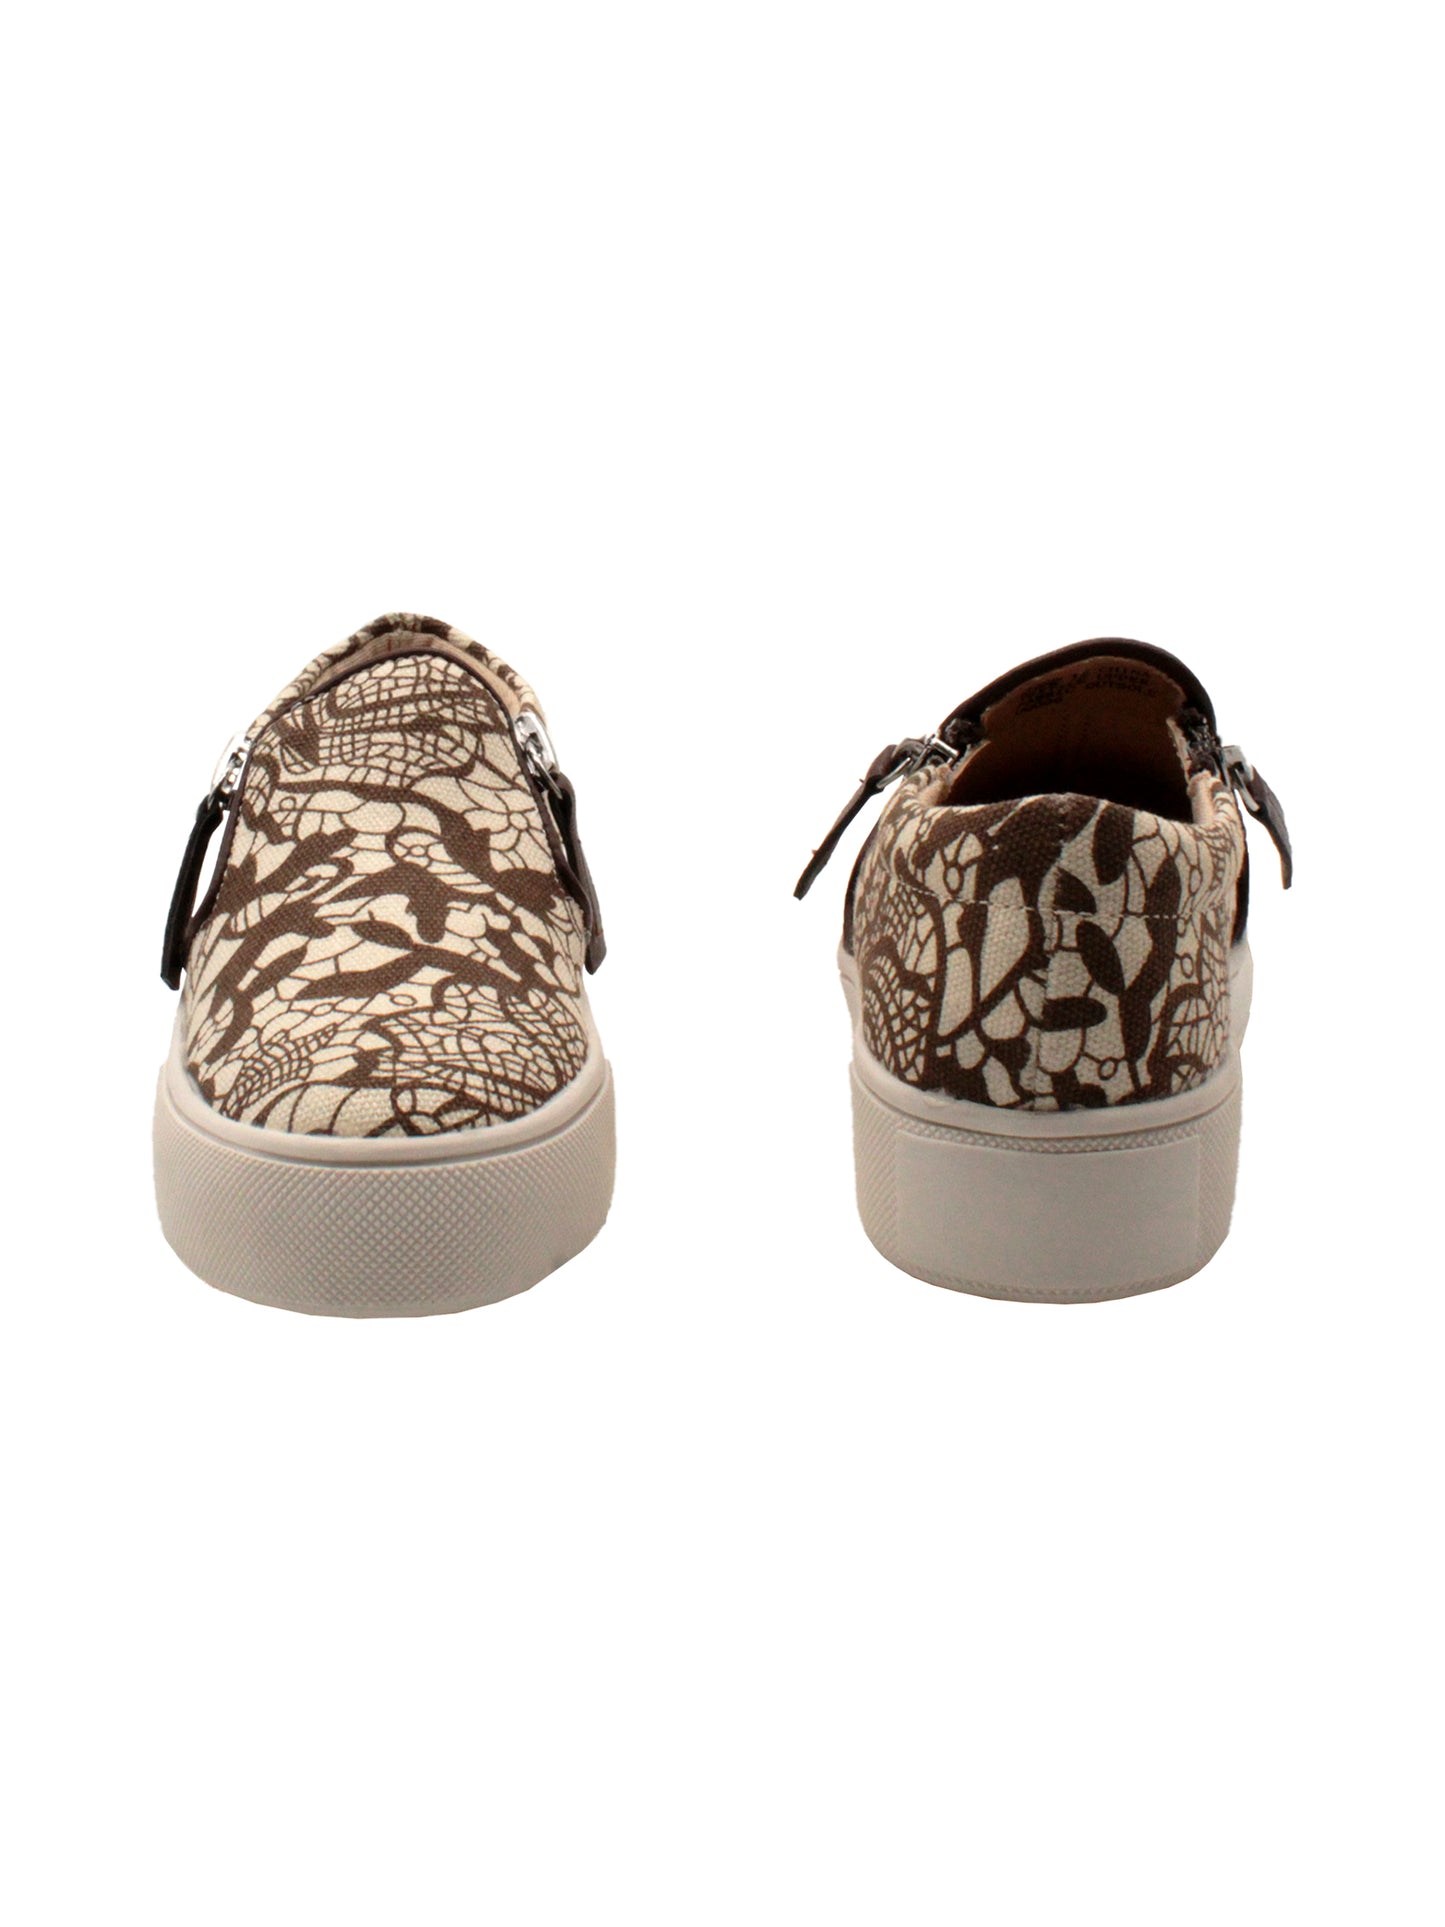 Volatile Kid’s ‘Chorus’ brown lace double zipper sneaker in printed cotton canvas is designed to easily slip on and off. They feature a cushioned sock stationed on a textured rubber sneaker bottom that’s ready for all day play. Pair them with casual outfits and dress up looks alike. front and back